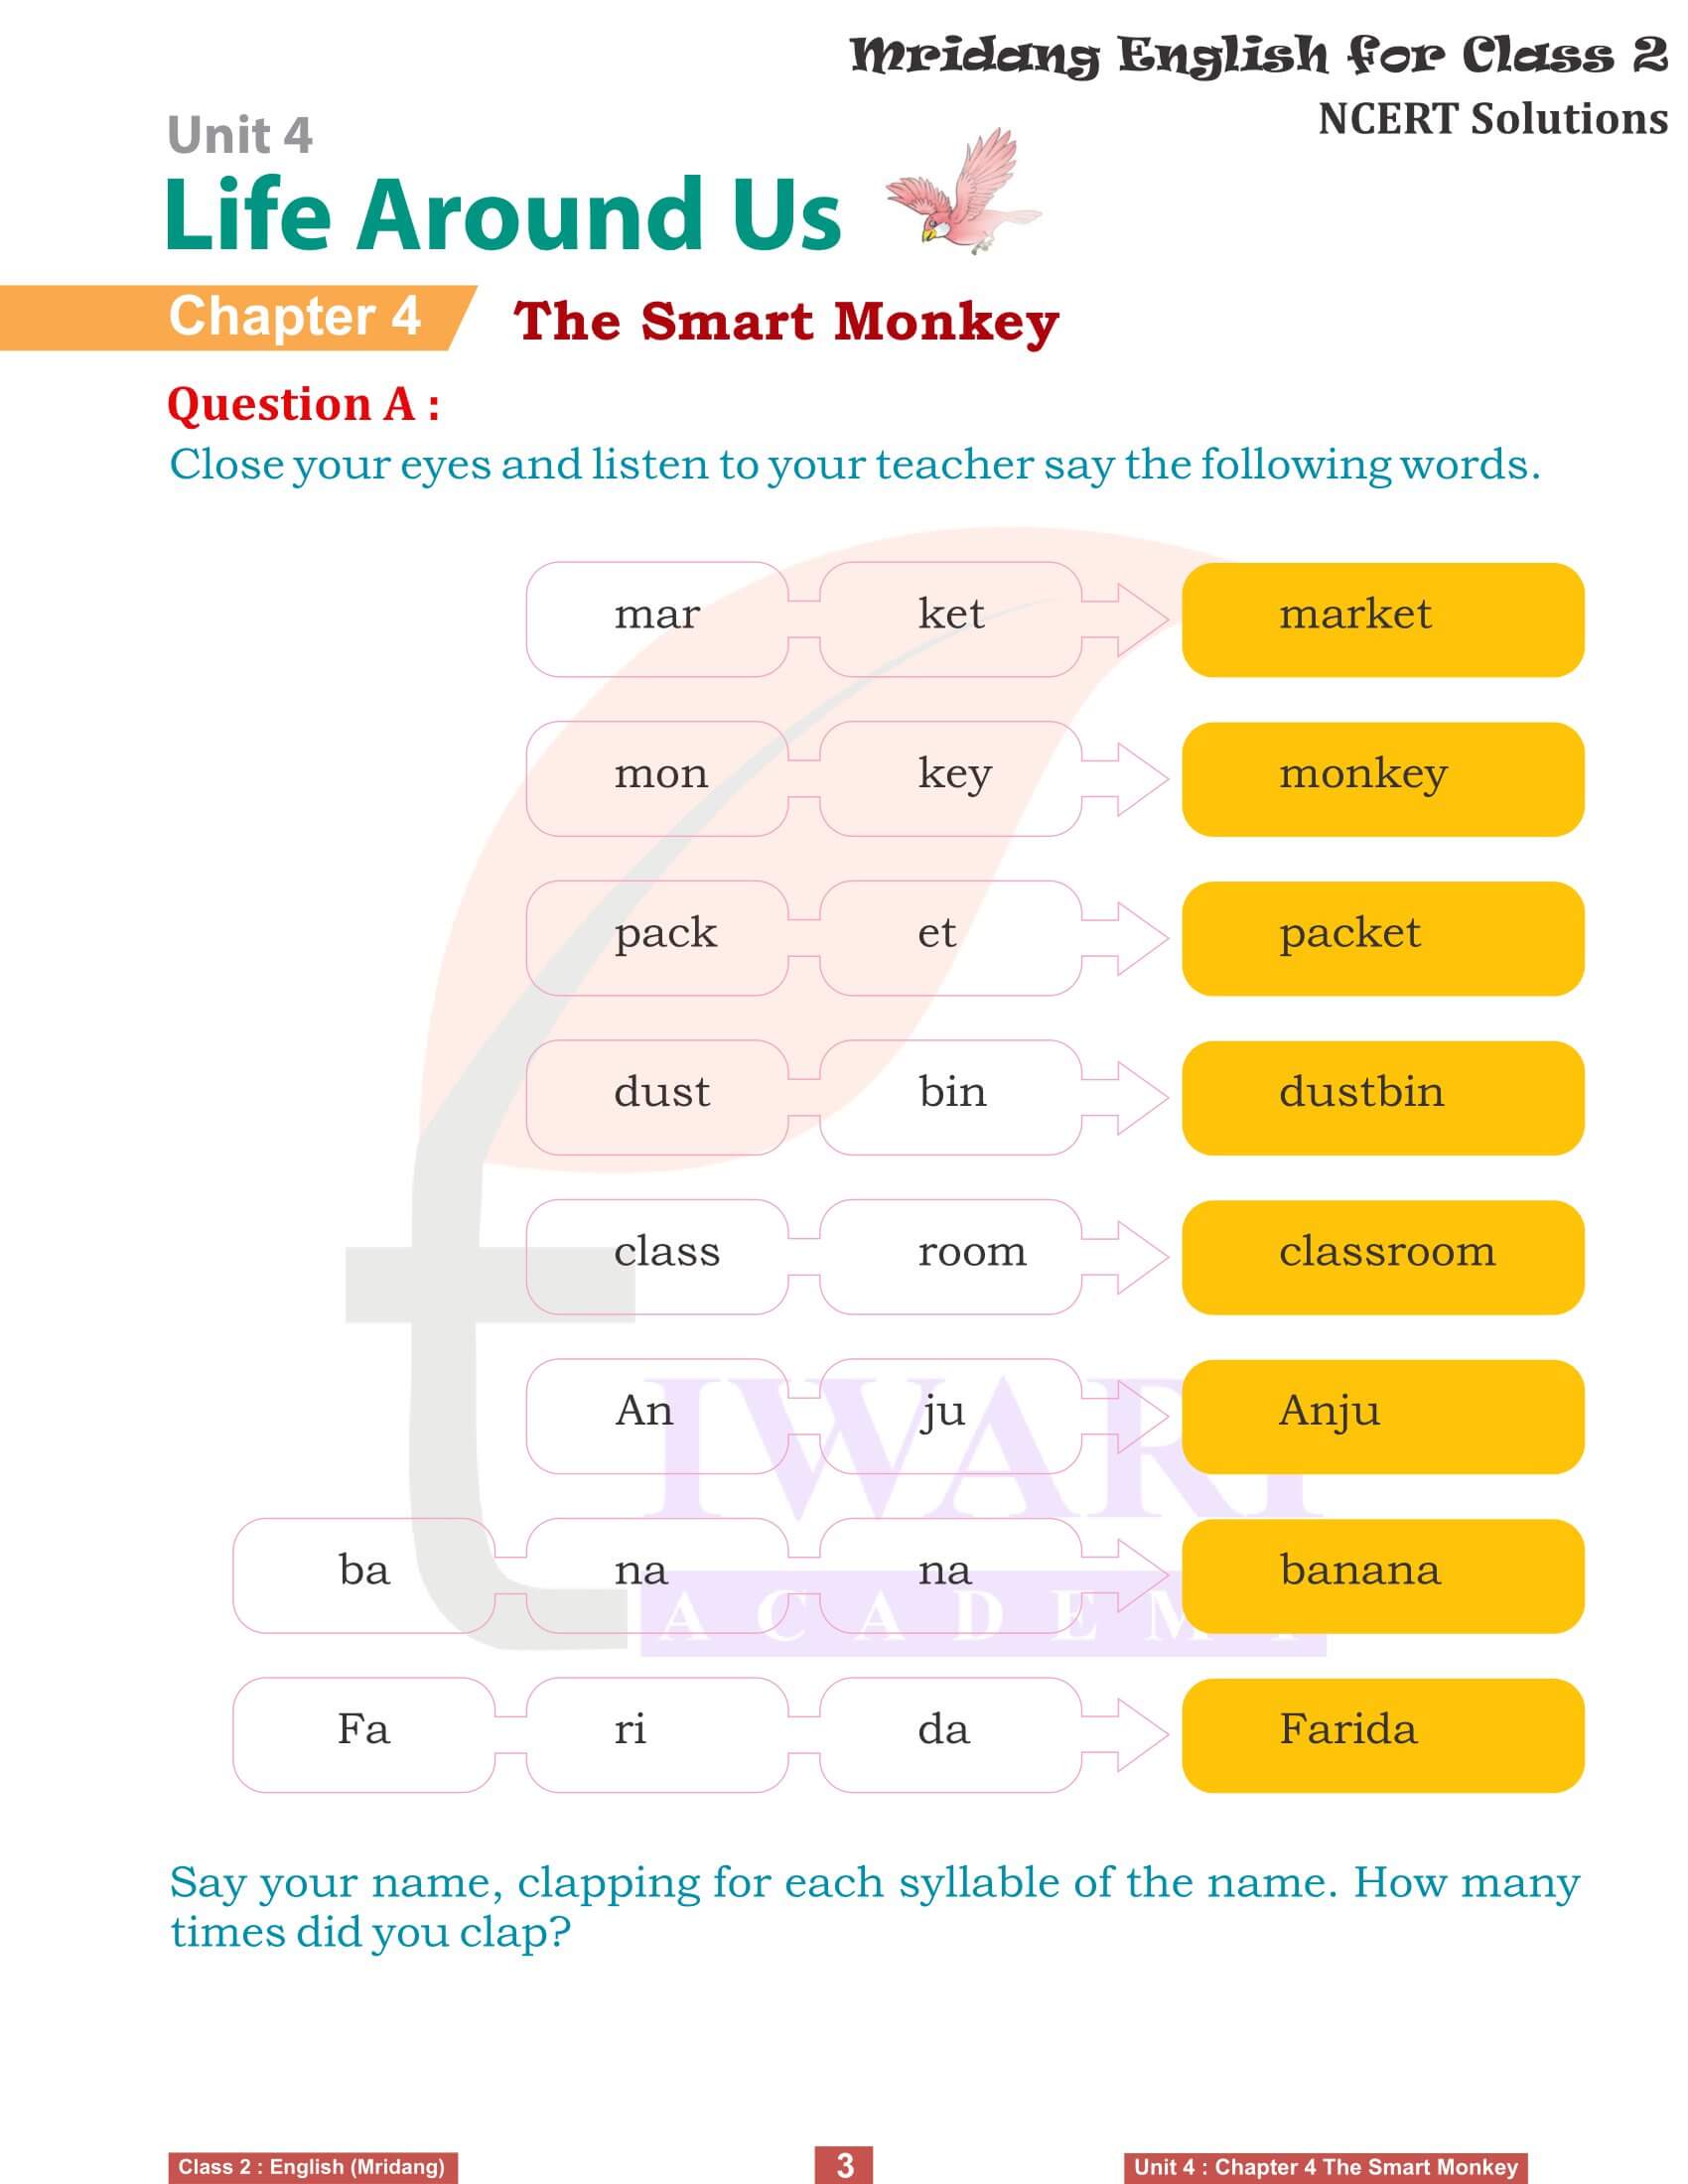 NCERT Solutions for Class 2 English Mridang Unit 4 Life Around Us Chapter 4 The Smart Monkey Question Answers